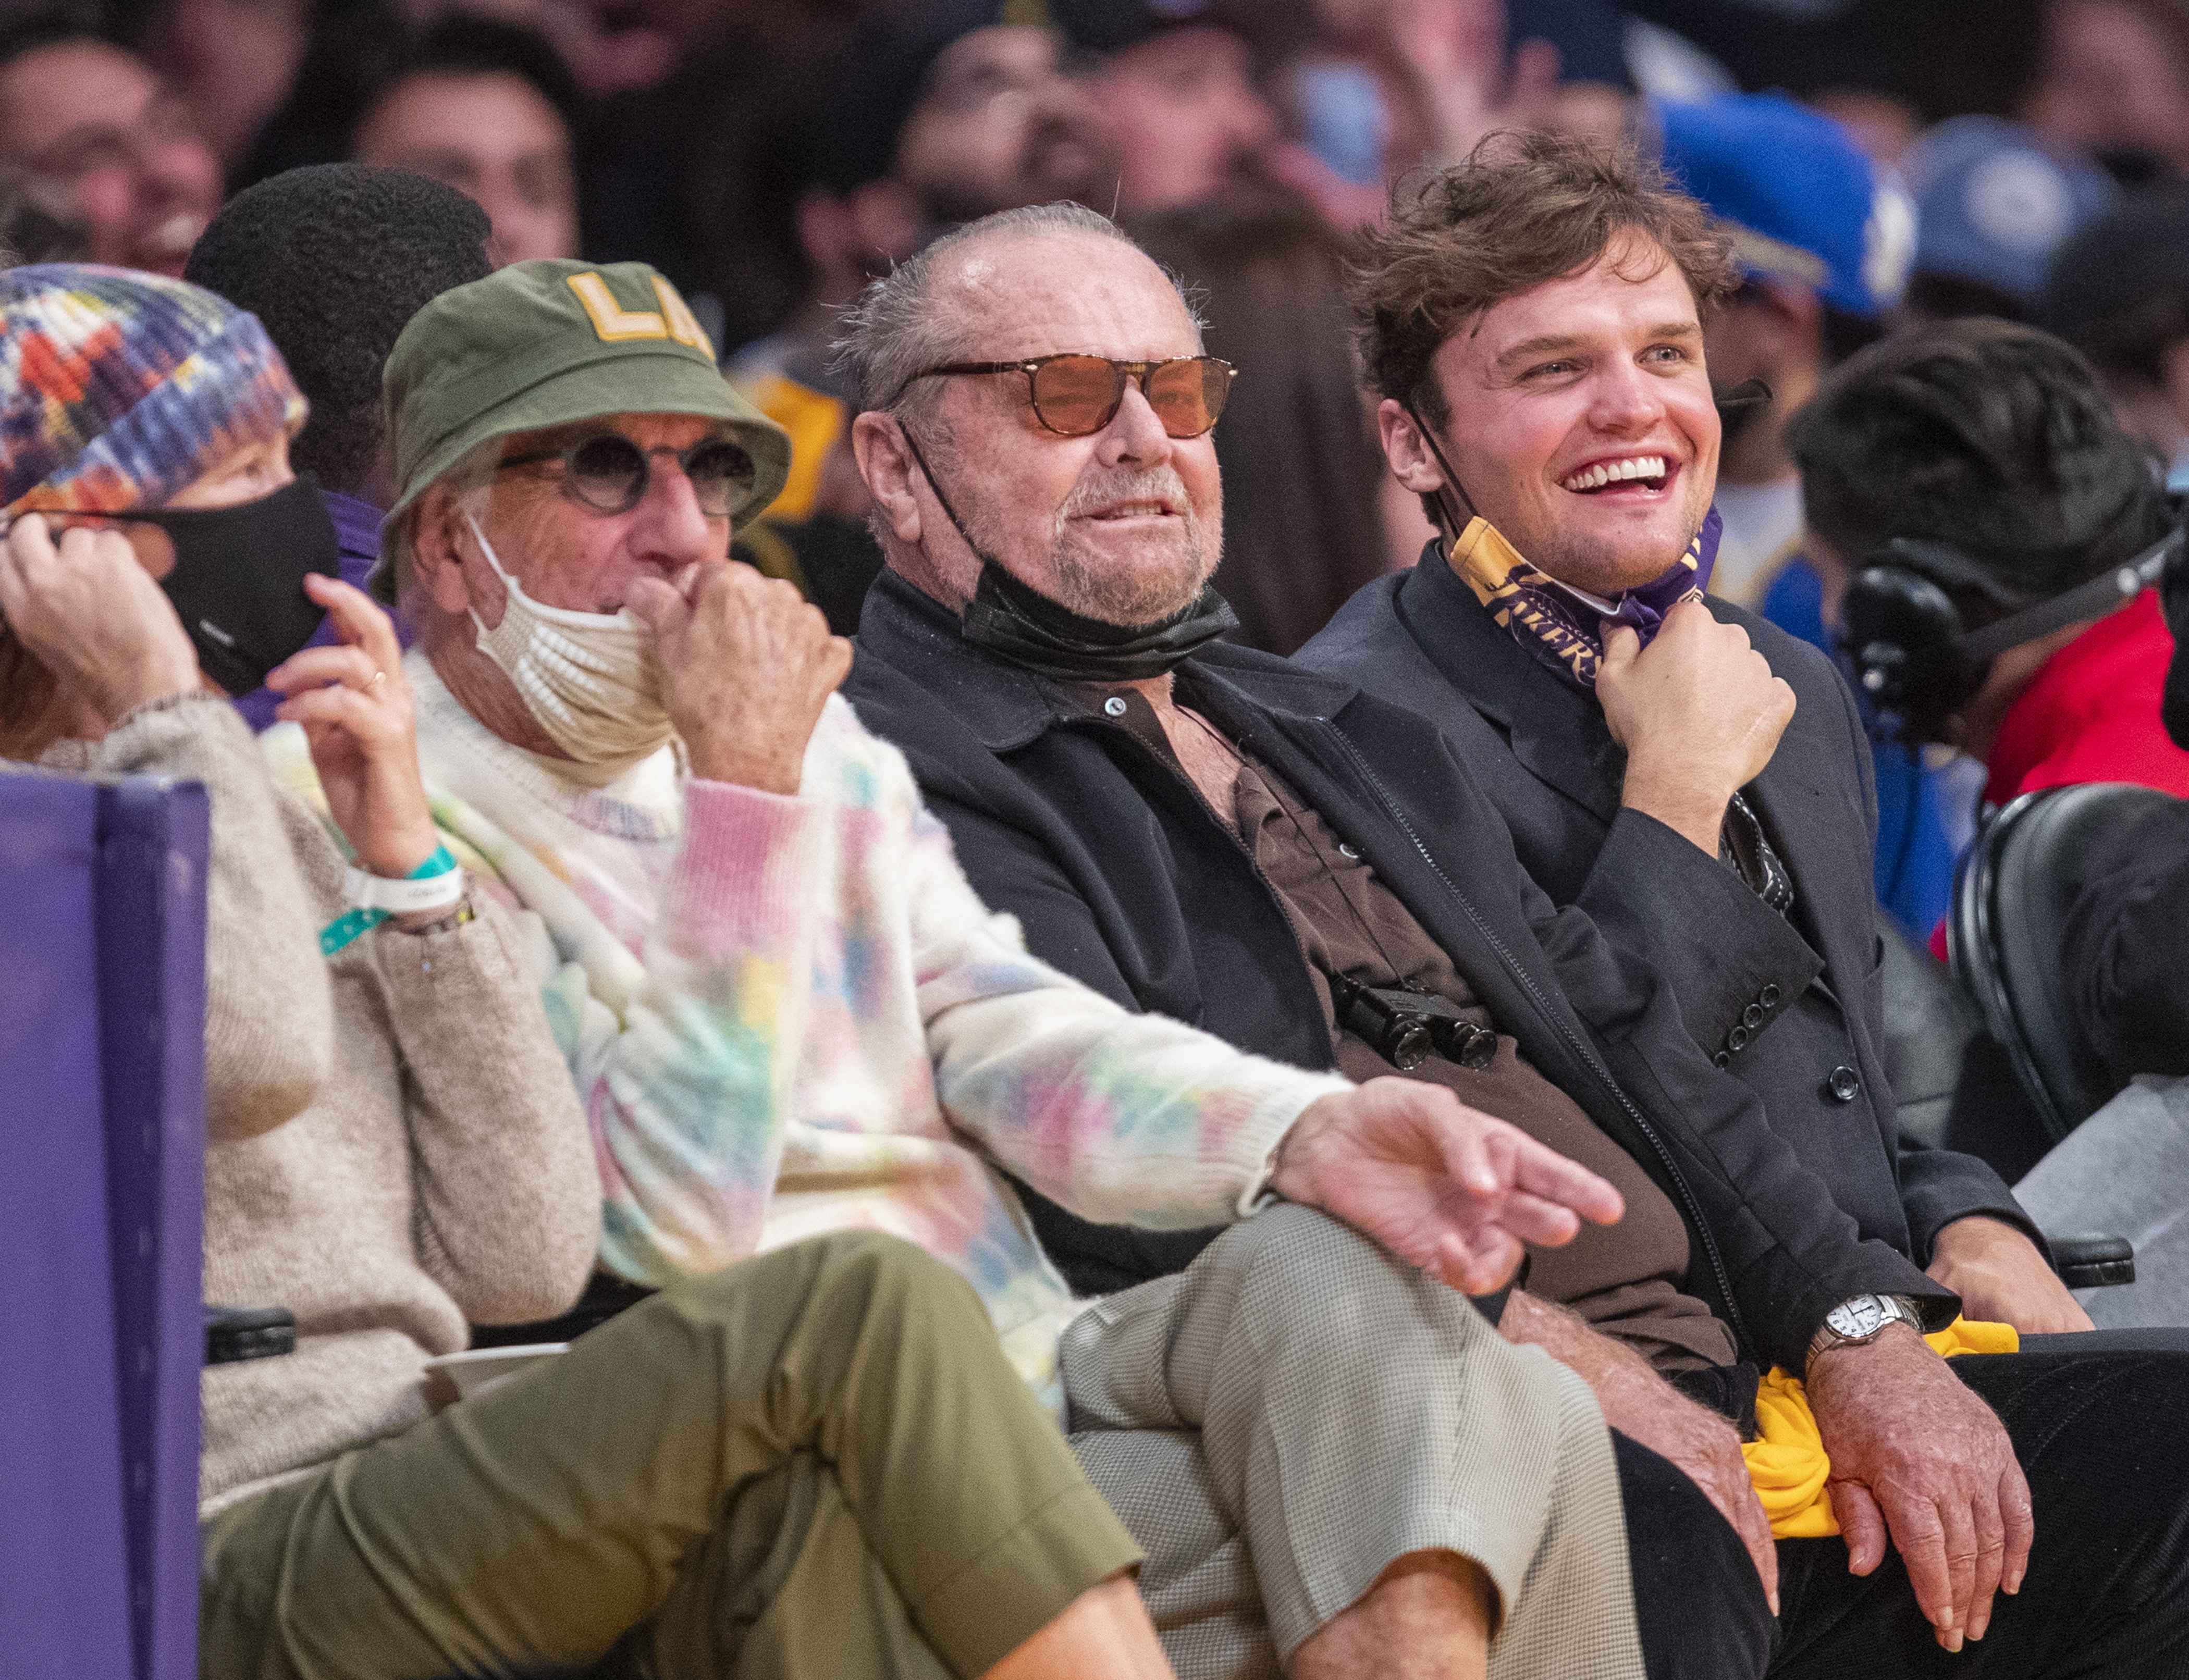 Jack Nicholson and his son Ray attend a game between the Golden State Warriors and the Los Angeles Lakers on October 19, 2021, at Staples Center in Los Angeles. | Source: Getty Images